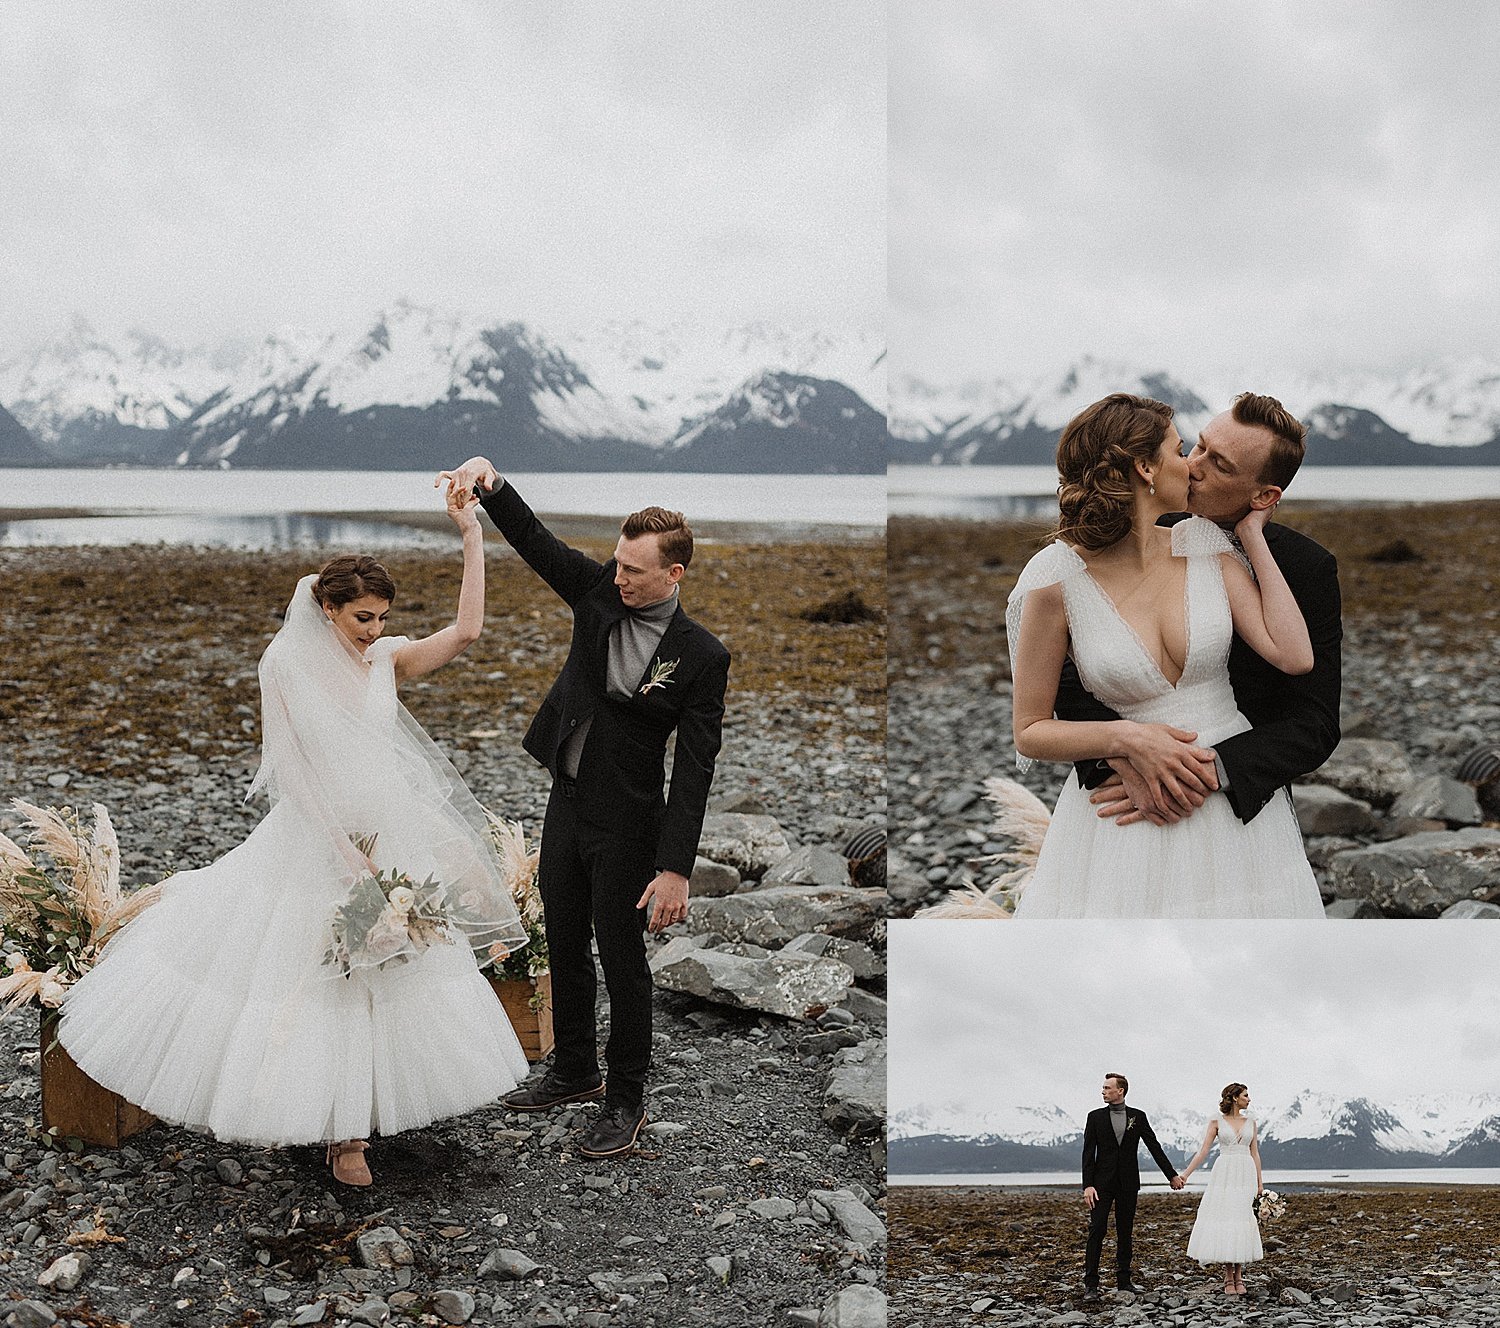  Bride twirls with groom in front of seward  mountain range by wedding photographer theresa mcdonald 